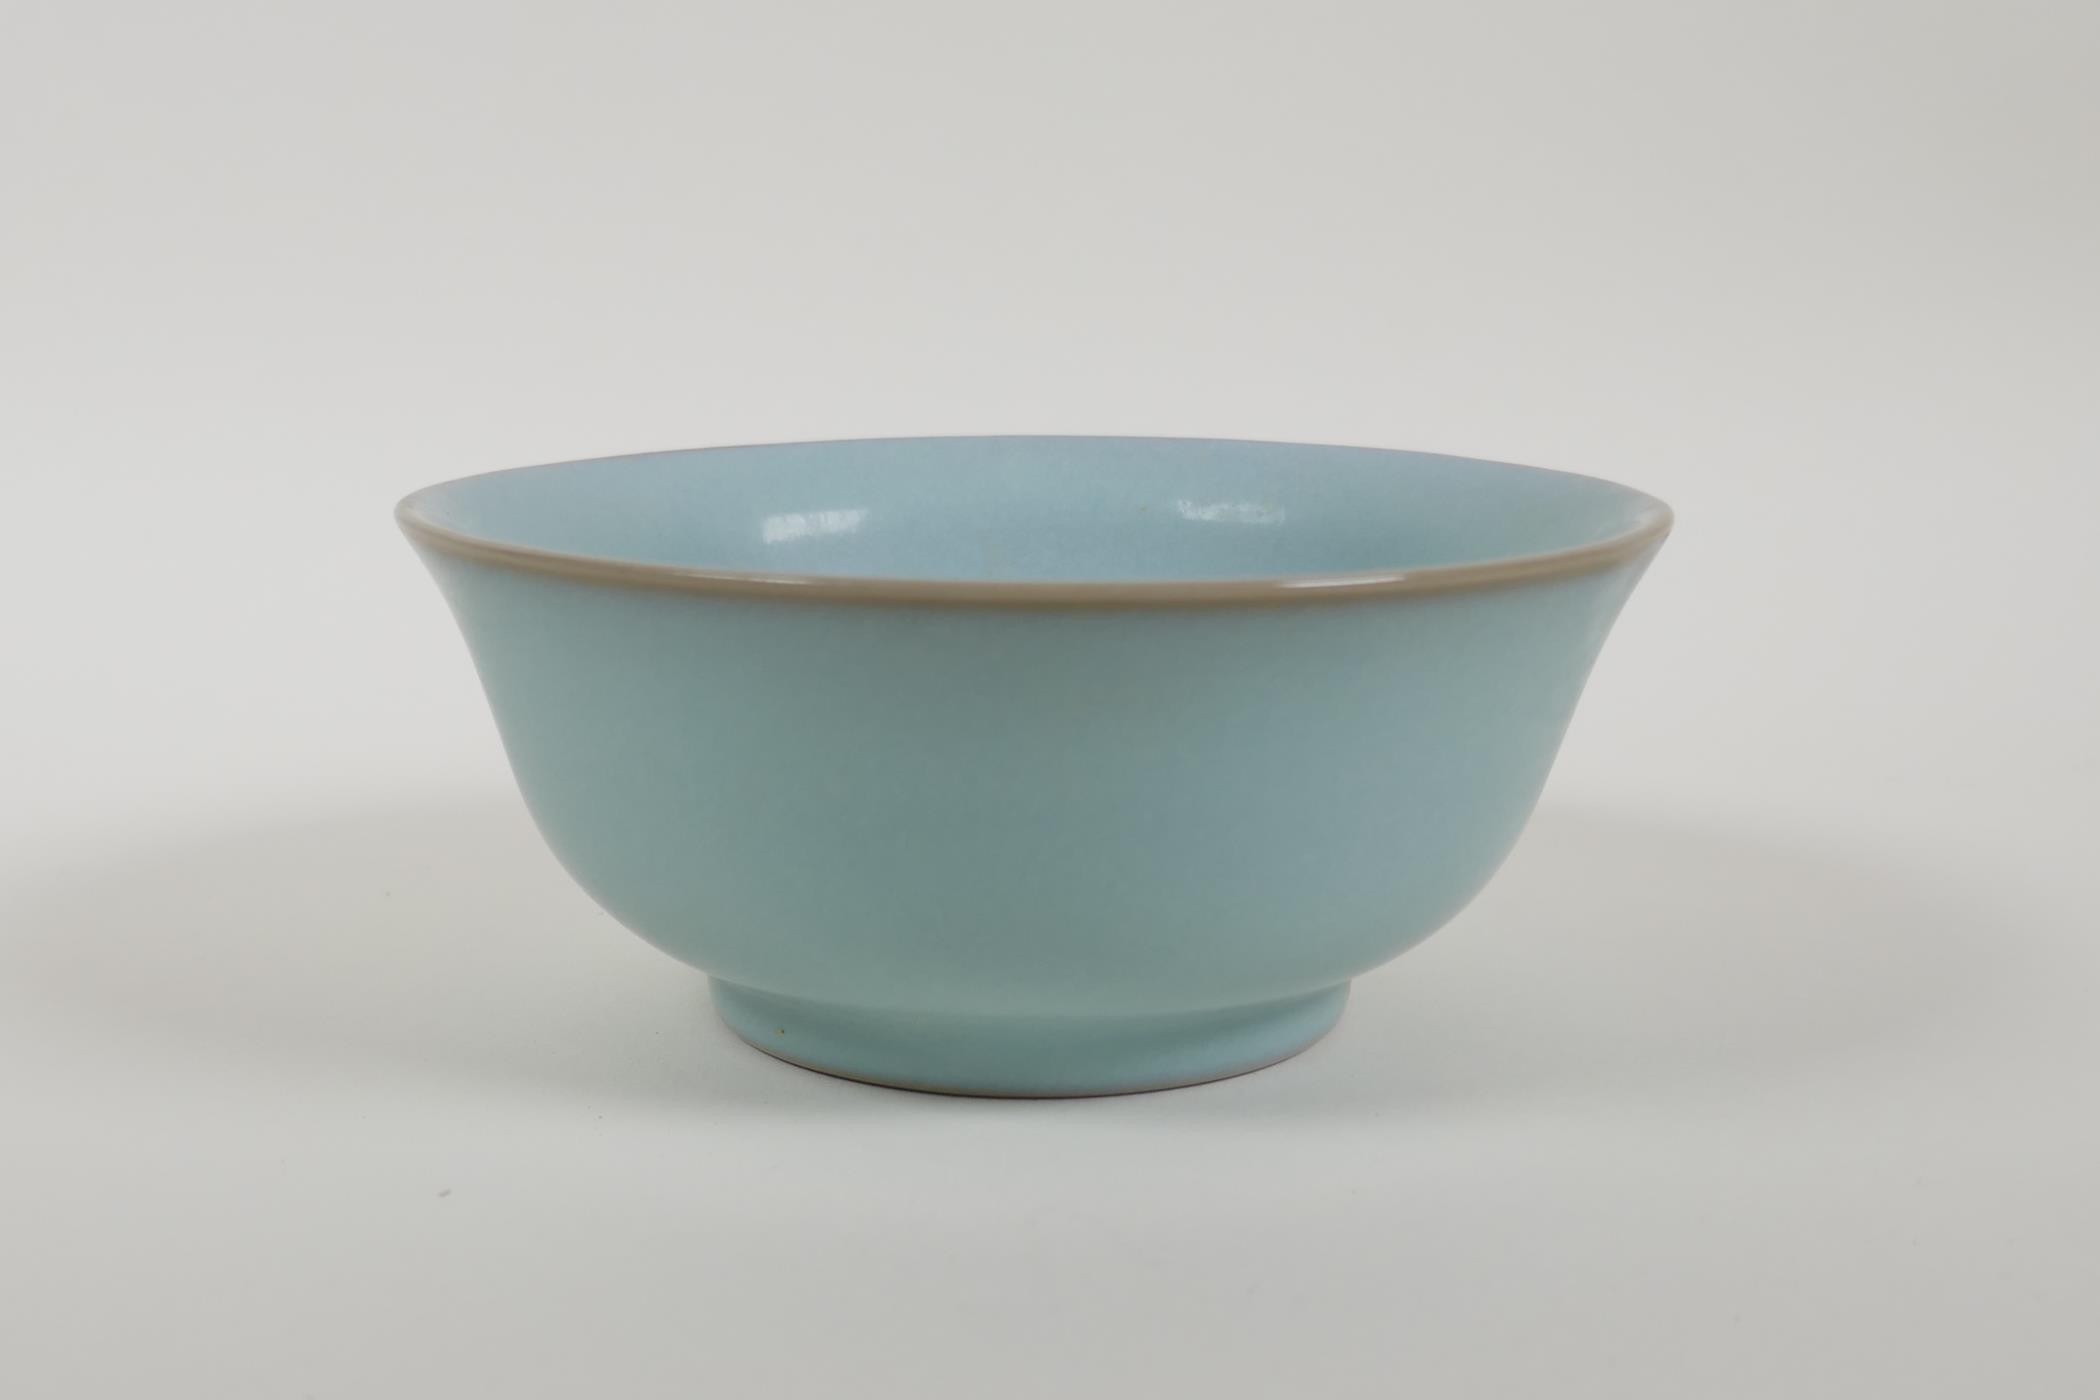 A Chinese celadon Ru ware style porcelain rice bowl, 5½" diameter - Image 2 of 6